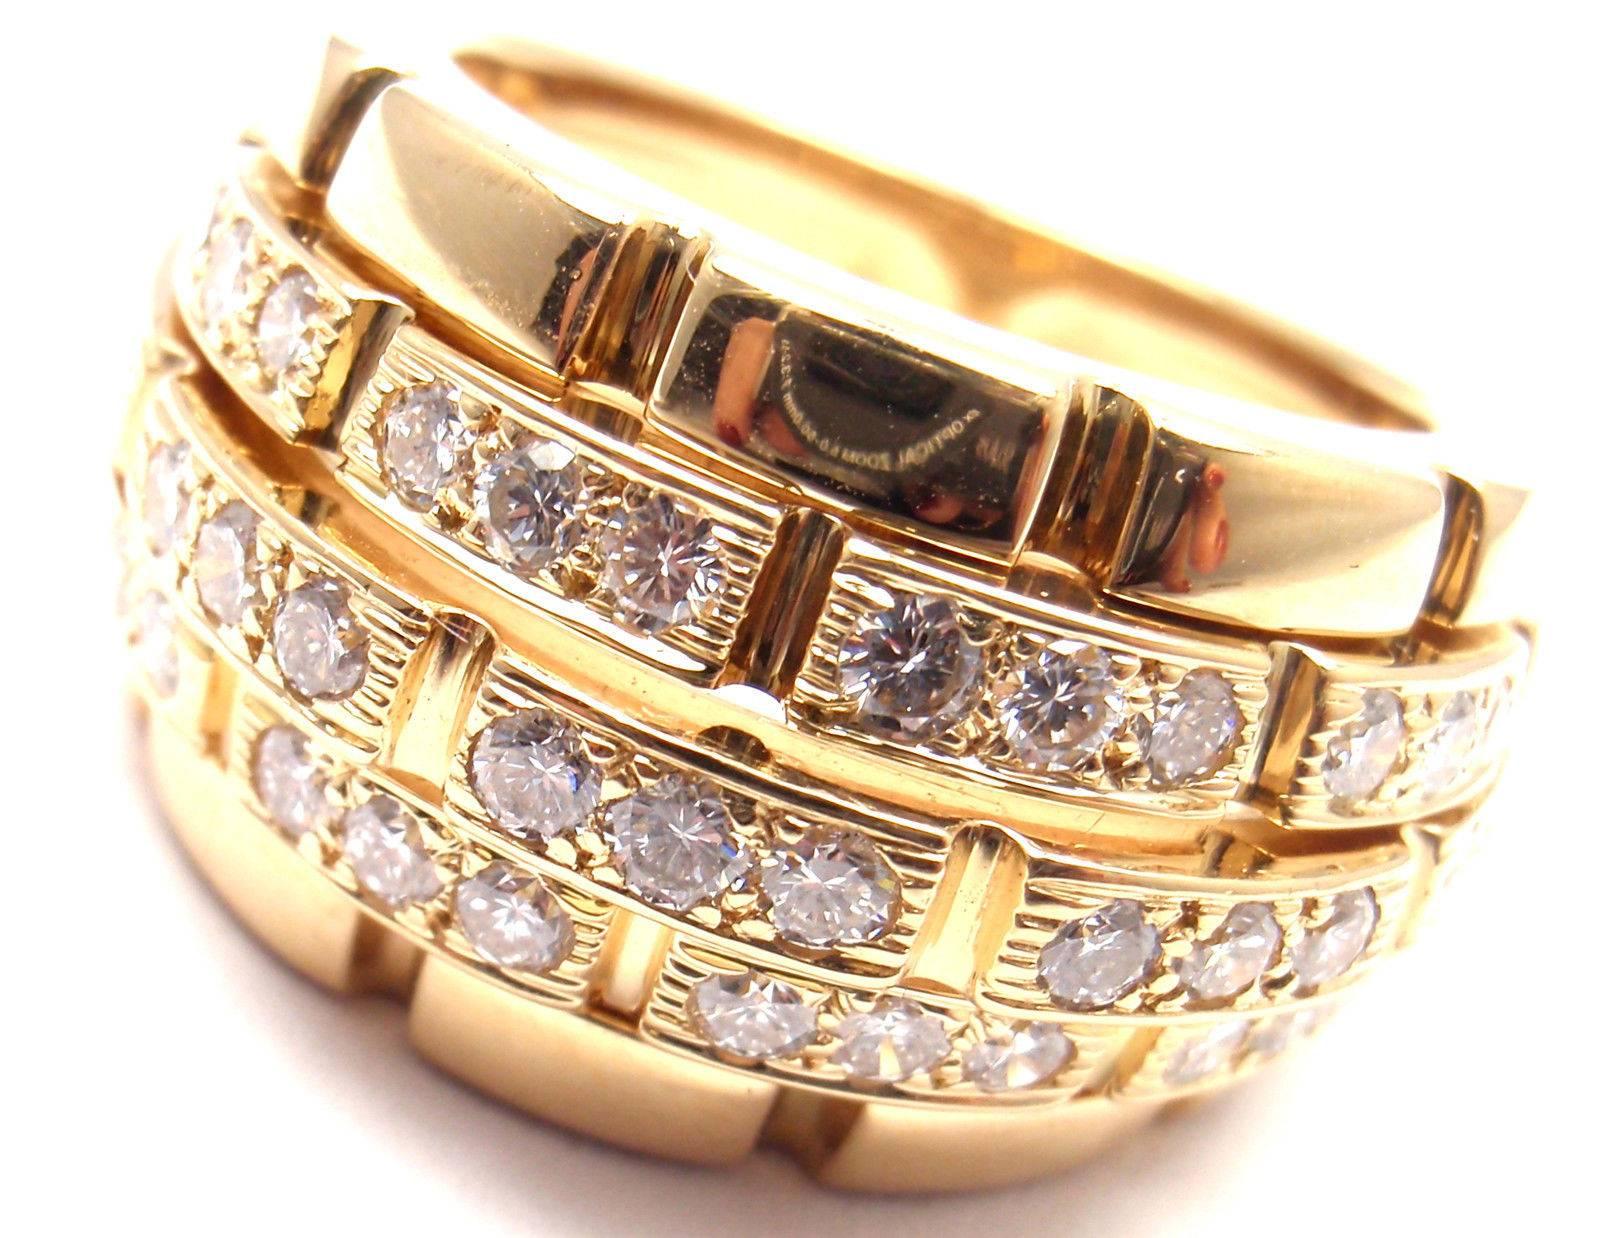 18k Yellow Gold Maillon Panthere Diamond Band Ring by Cartier.
With 39 round brilliant cut diamonds VS1 clarity, G color.

Details:
Size: 5 3/4, European 51
Width: 13.5mm
Weight: 15.4 grams
Stamped Hallmarks:  750 Cartier 564103
*Free